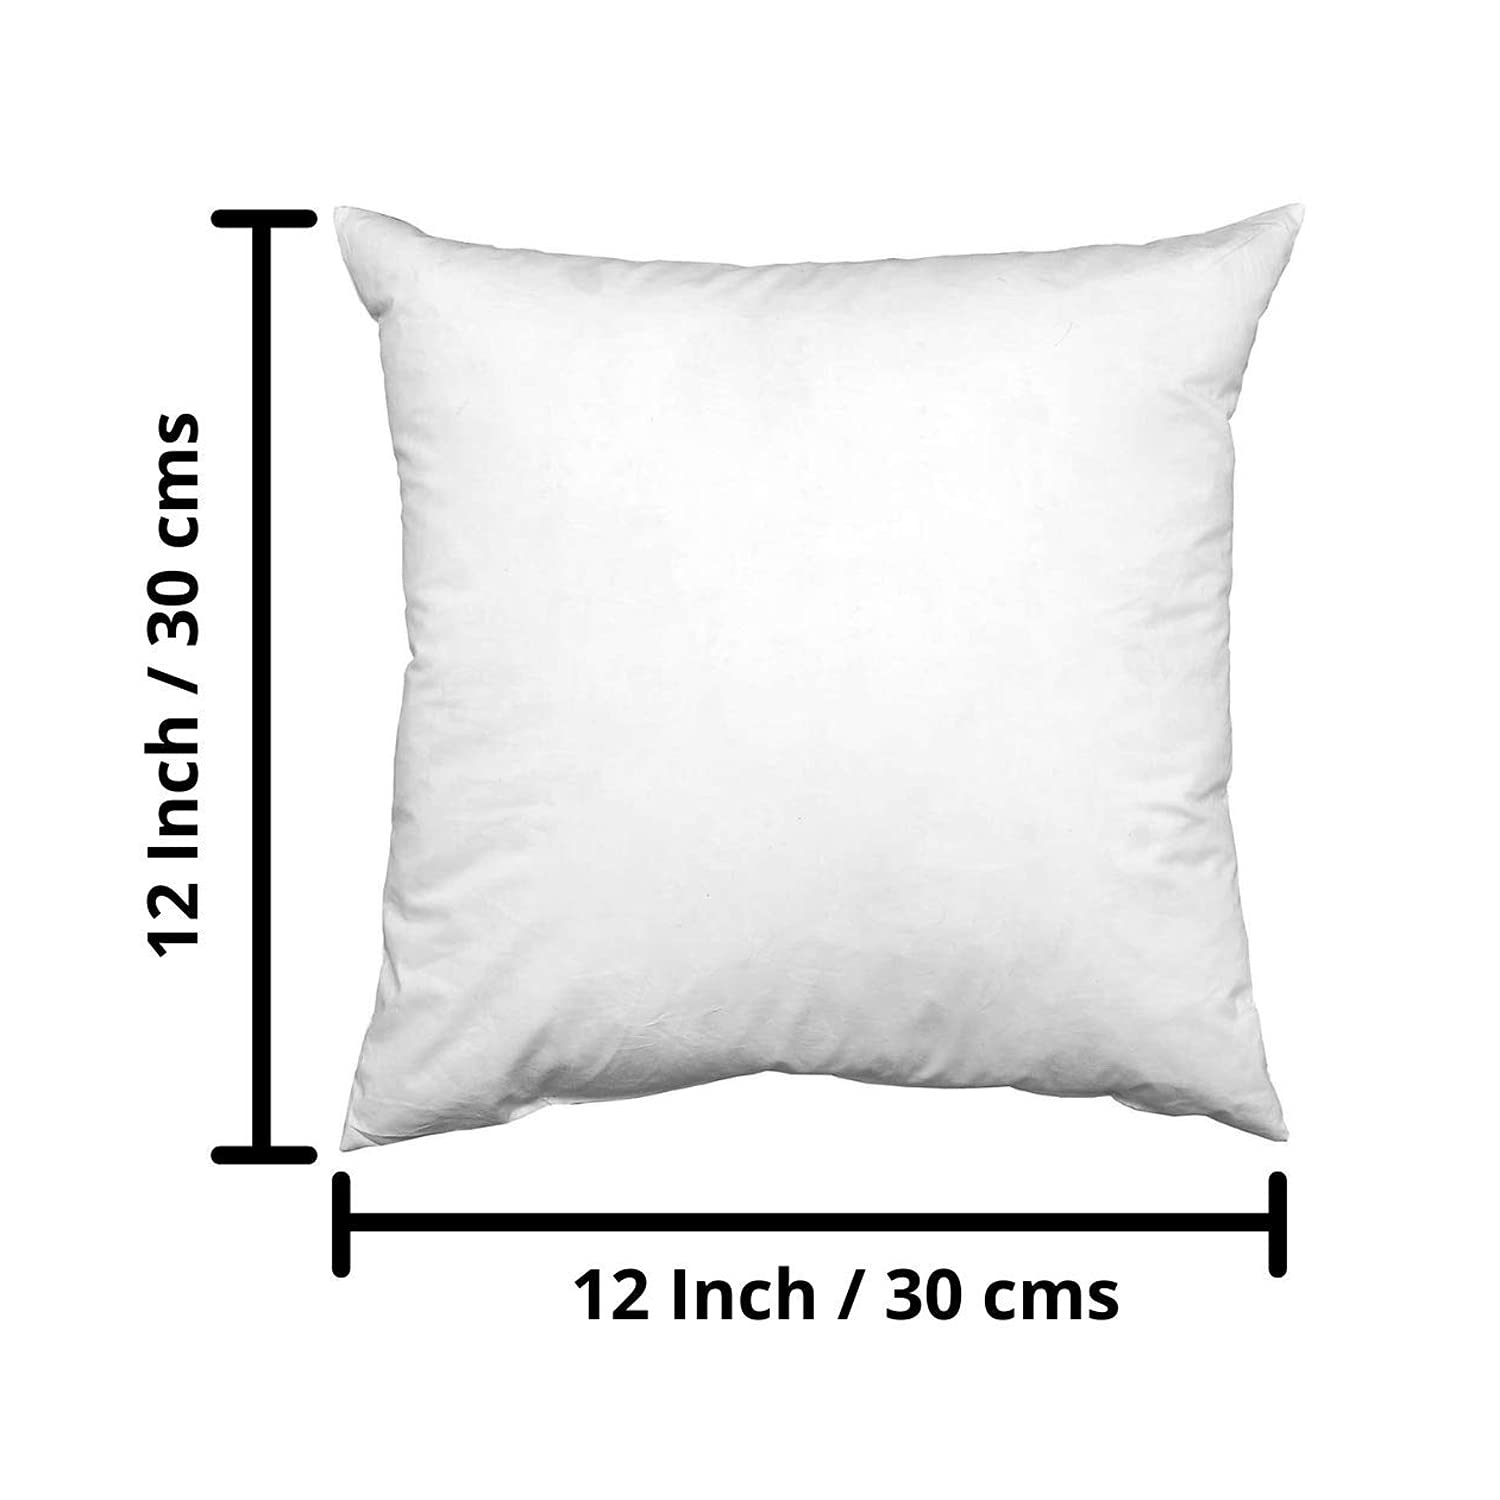 Heart Home Square Microfiber Filled Cushion Filler|Soft & Fluffy Pillow|Washable & Odorless|Dust Mite Resistant |Ideal Size 12 X 12 Inch|Pack of 2 (White)